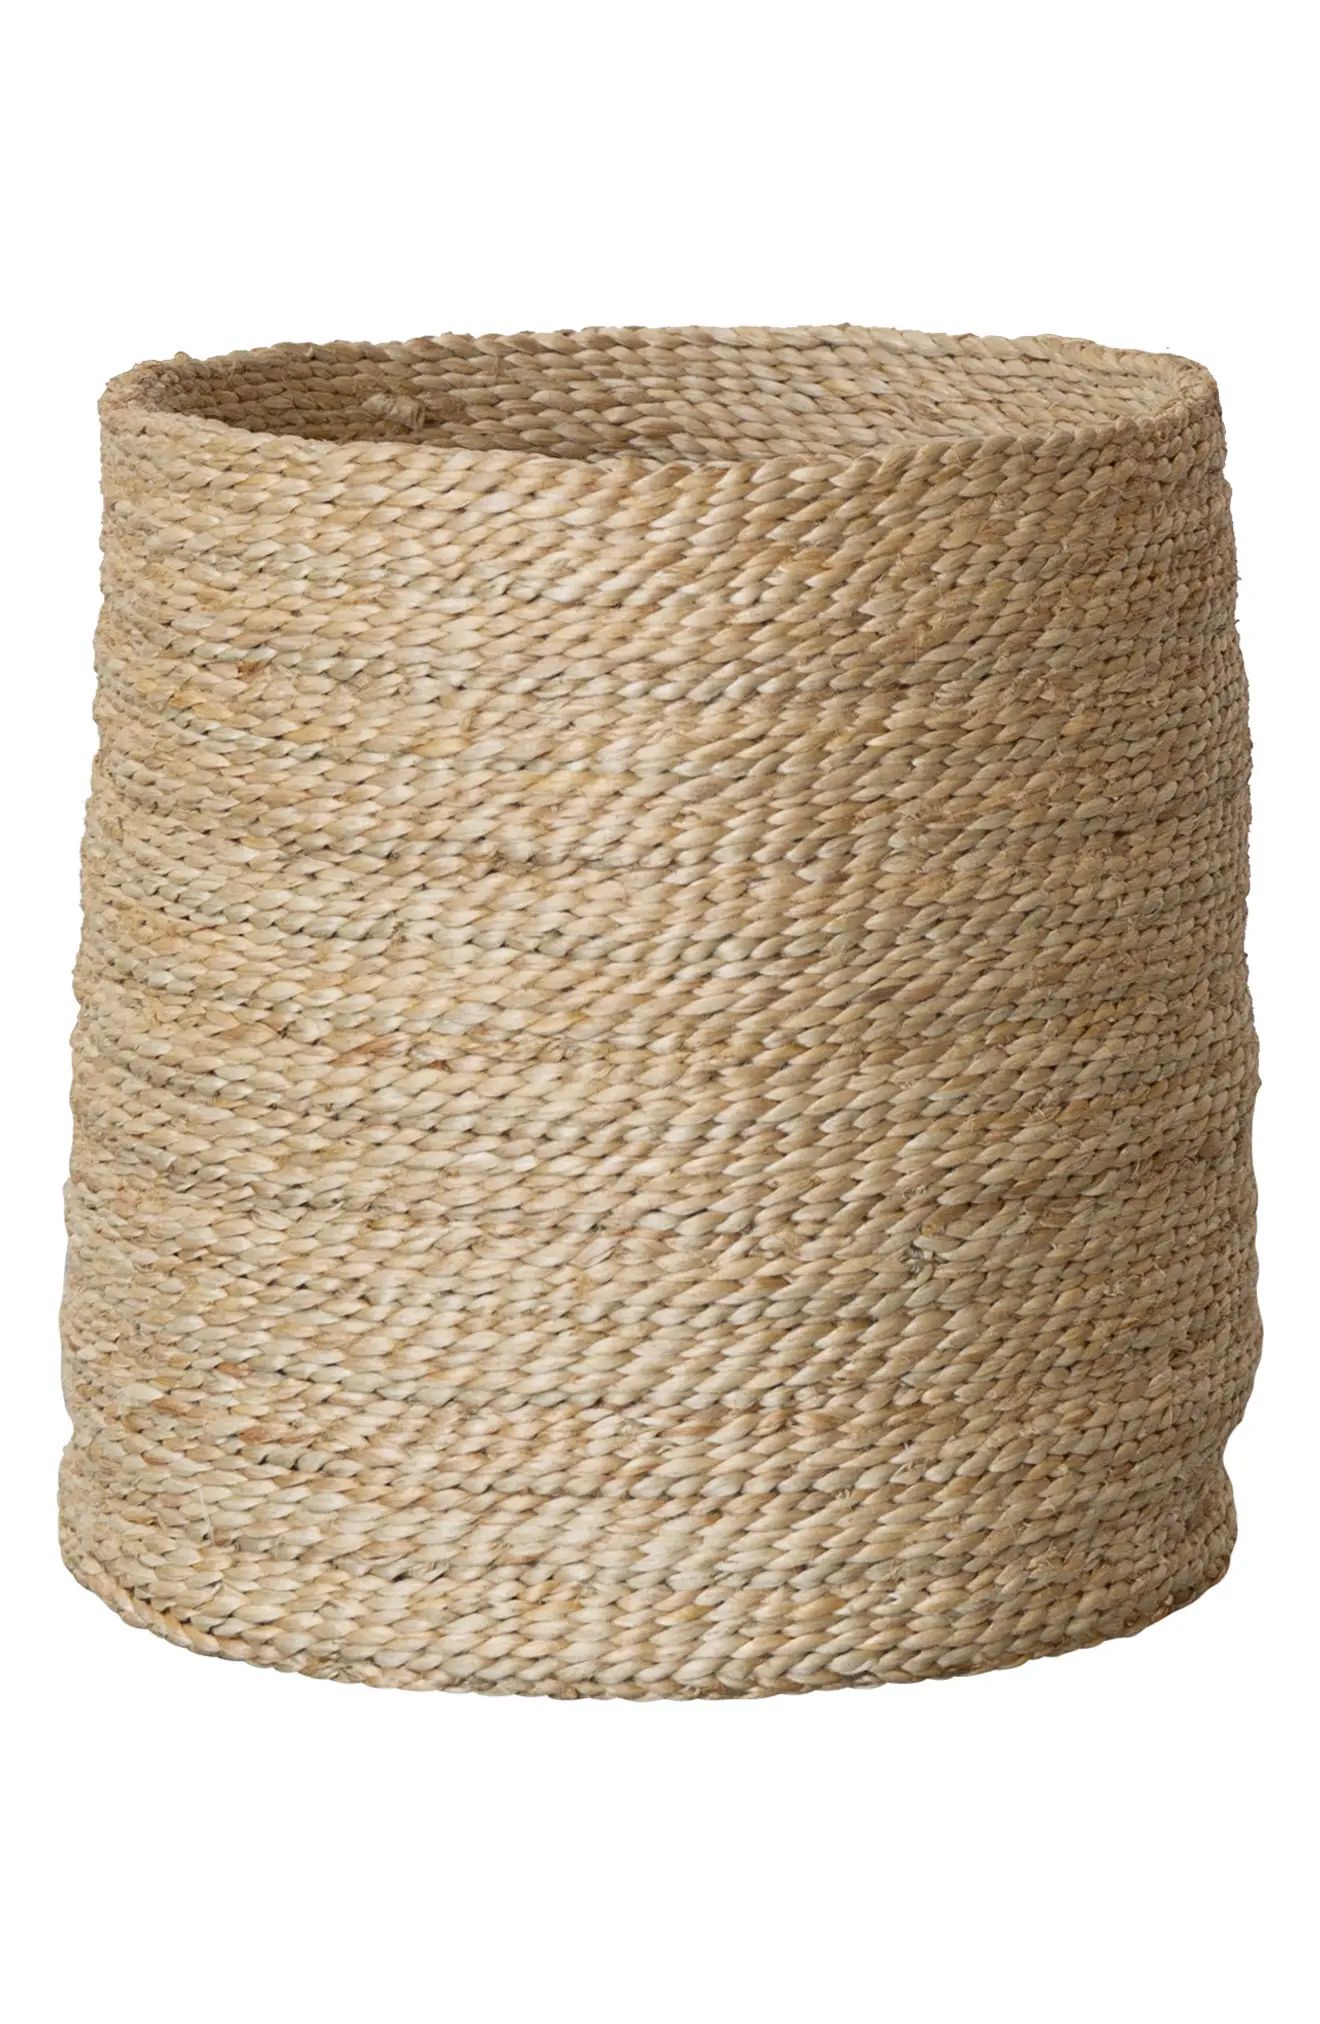 Will & Atlas Round Jute Basket in Natural at Nordstrom, Size Small | Nordstrom